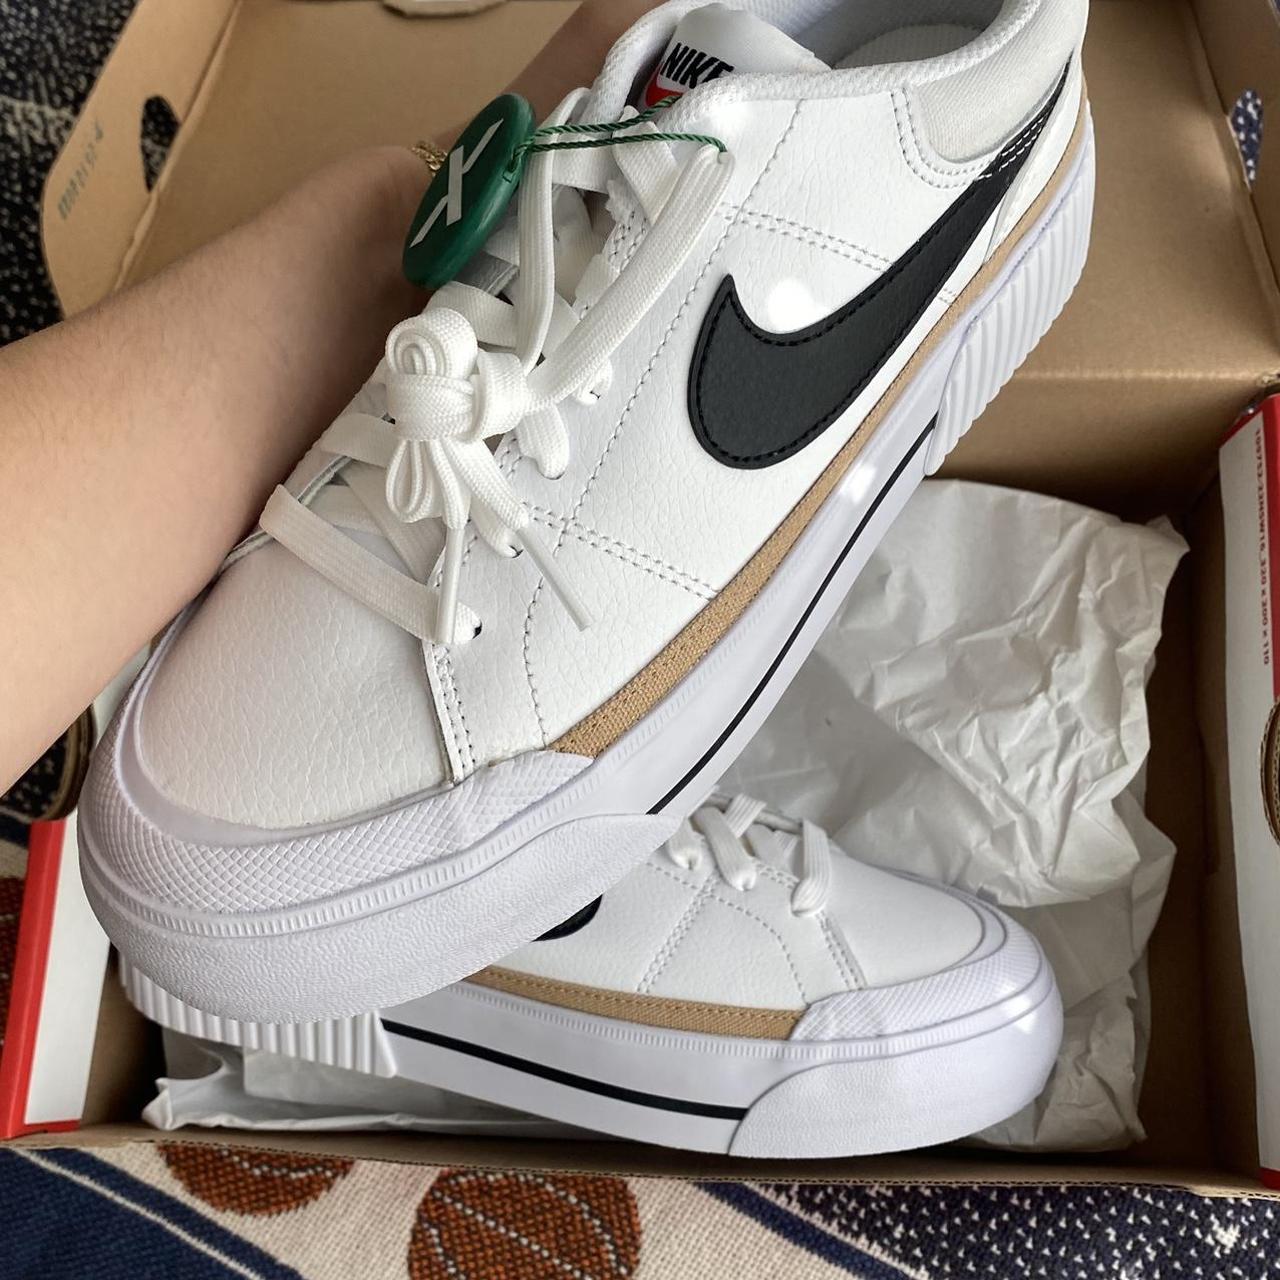 Nike Women's White and Black Trainers (3)